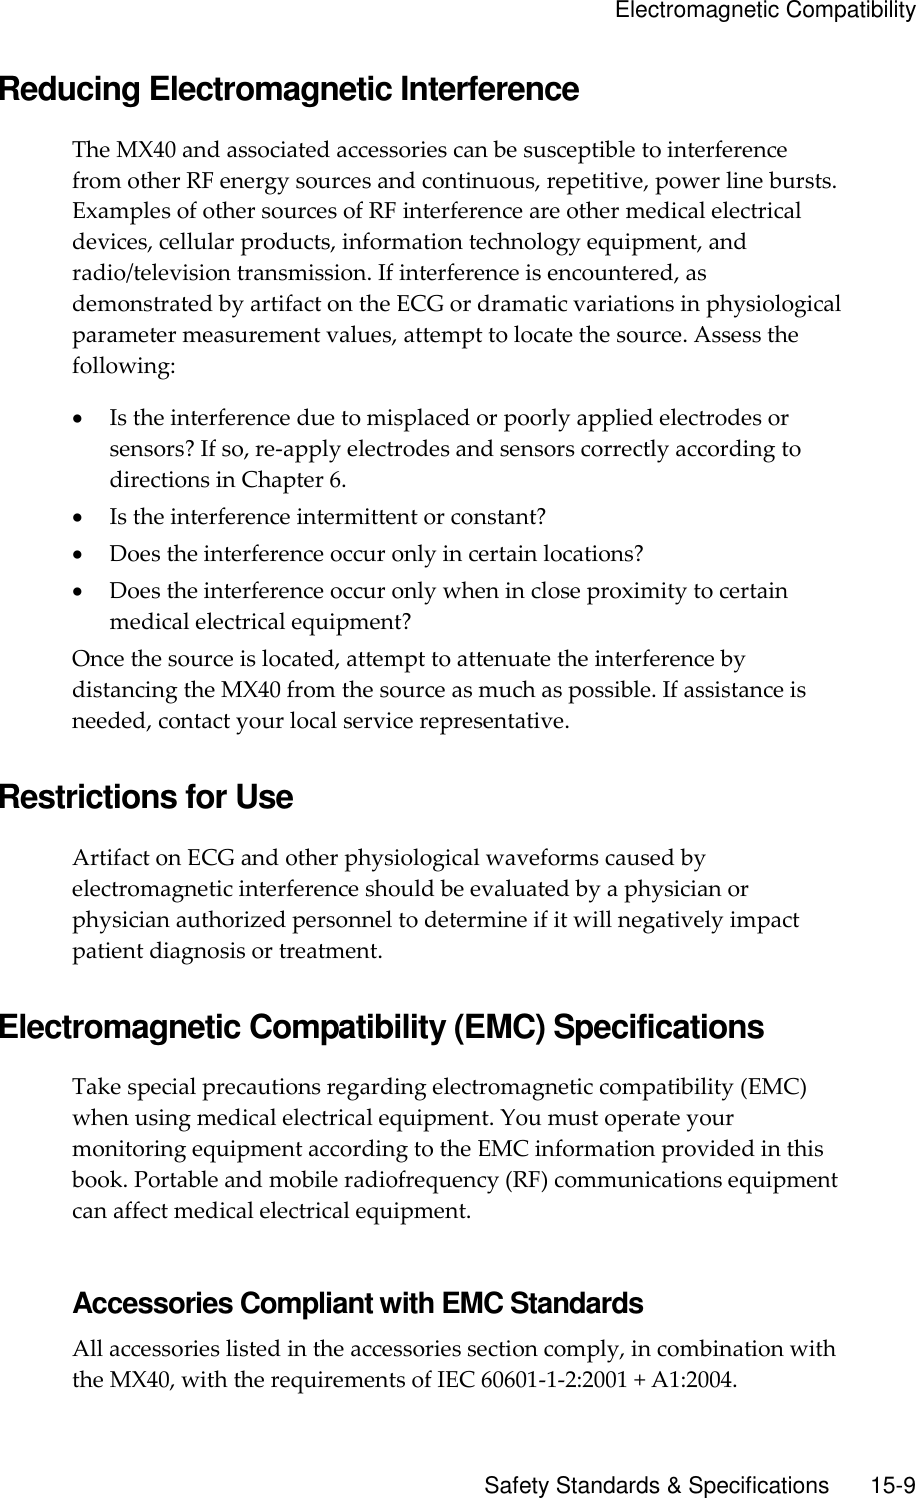     Electromagnetic Compatibility       Safety Standards &amp; Specifications        15-9 Reducing Electromagnetic Interference The MX40 and associated accessories can be susceptible to interference from other RF energy sources and continuous, repetitive, power line bursts. Examples of other sources of RF interference are other medical electrical devices, cellular products, information technology equipment, and radio/television transmission. If interference is encountered, as demonstrated by artifact on the ECG or dramatic variations in physiological parameter measurement values, attempt to locate the source. Assess the following:  Is the interference due to misplaced or poorly applied electrodes or sensors? If so, re-apply electrodes and sensors correctly according to directions in Chapter 6.  Is the interference intermittent or constant?  Does the interference occur only in certain locations?  Does the interference occur only when in close proximity to certain medical electrical equipment? Once the source is located, attempt to attenuate the interference by distancing the MX40 from the source as much as possible. If assistance is needed, contact your local service representative.  Restrictions for Use Artifact on ECG and other physiological waveforms caused by electromagnetic interference should be evaluated by a physician or physician authorized personnel to determine if it will negatively impact patient diagnosis or treatment.  Electromagnetic Compatibility (EMC) Specifications Take special precautions regarding electromagnetic compatibility (EMC) when using medical electrical equipment. You must operate your monitoring equipment according to the EMC information provided in this book. Portable and mobile radiofrequency (RF) communications equipment can affect medical electrical equipment.  Accessories Compliant with EMC Standards All accessories listed in the accessories section comply, in combination with the MX40, with the requirements of IEC 60601-1-2:2001 + A1:2004. 